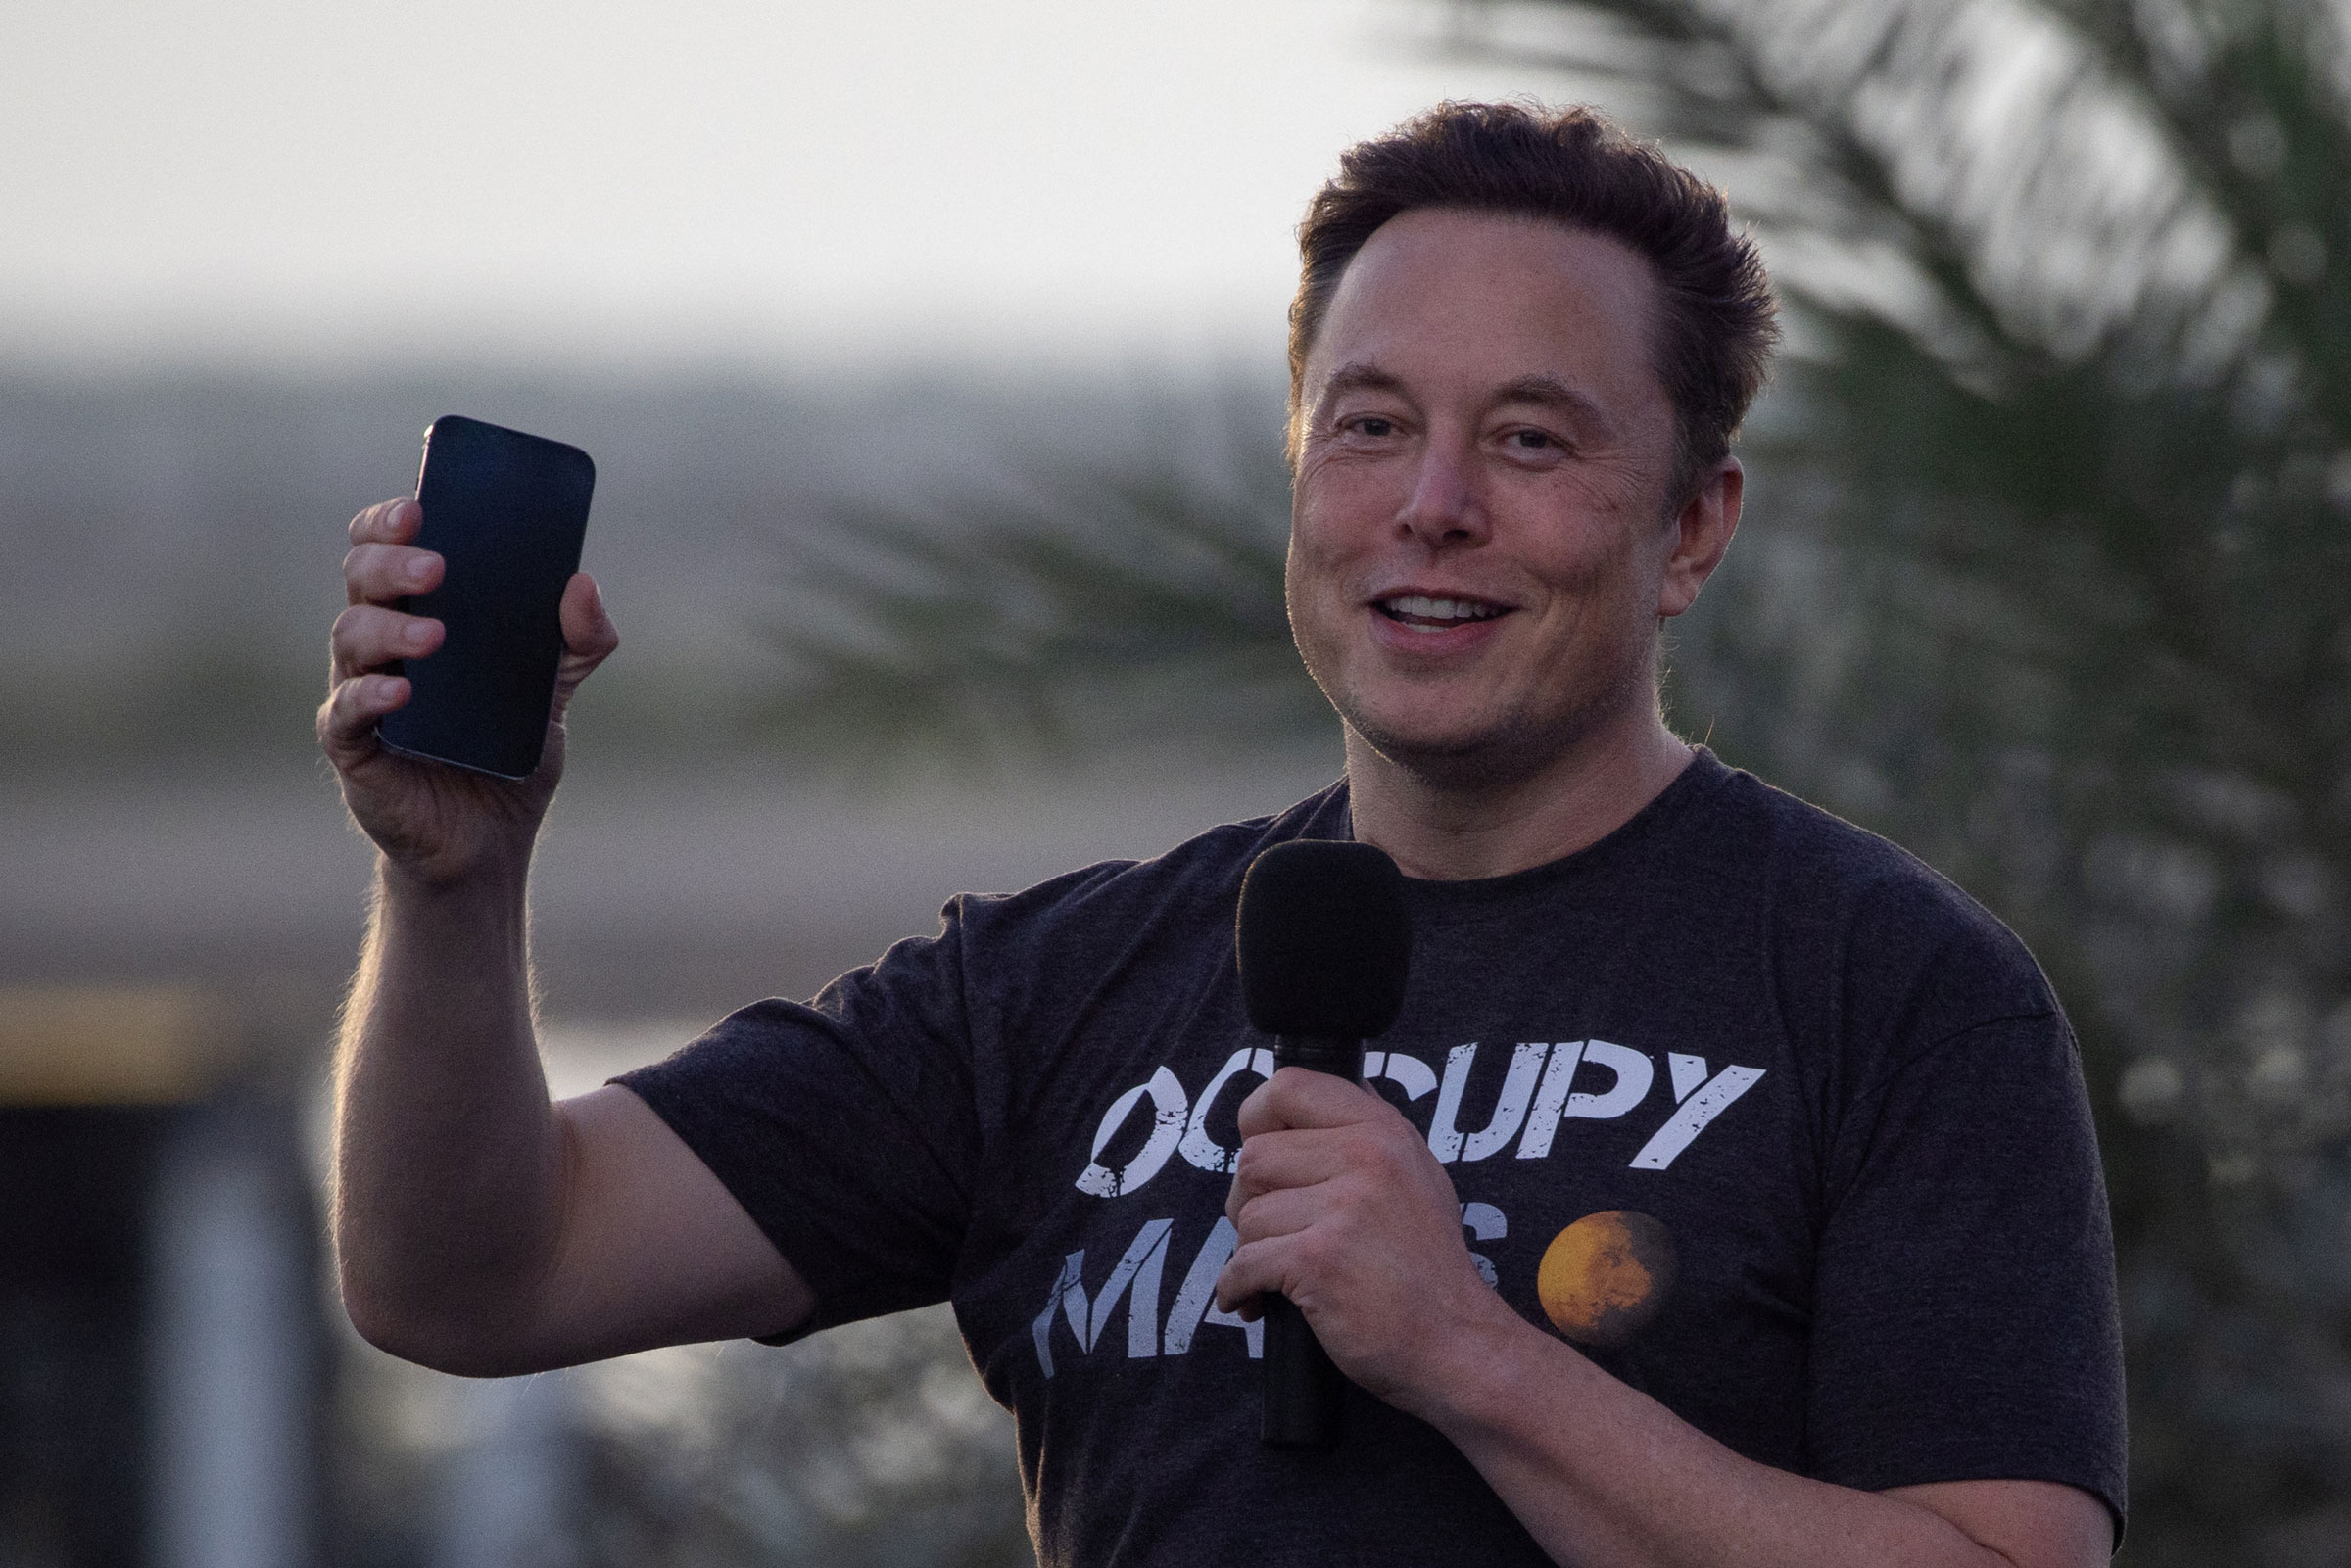 Elon Musk raises his phone during a news conference at the SpaceX Starbase